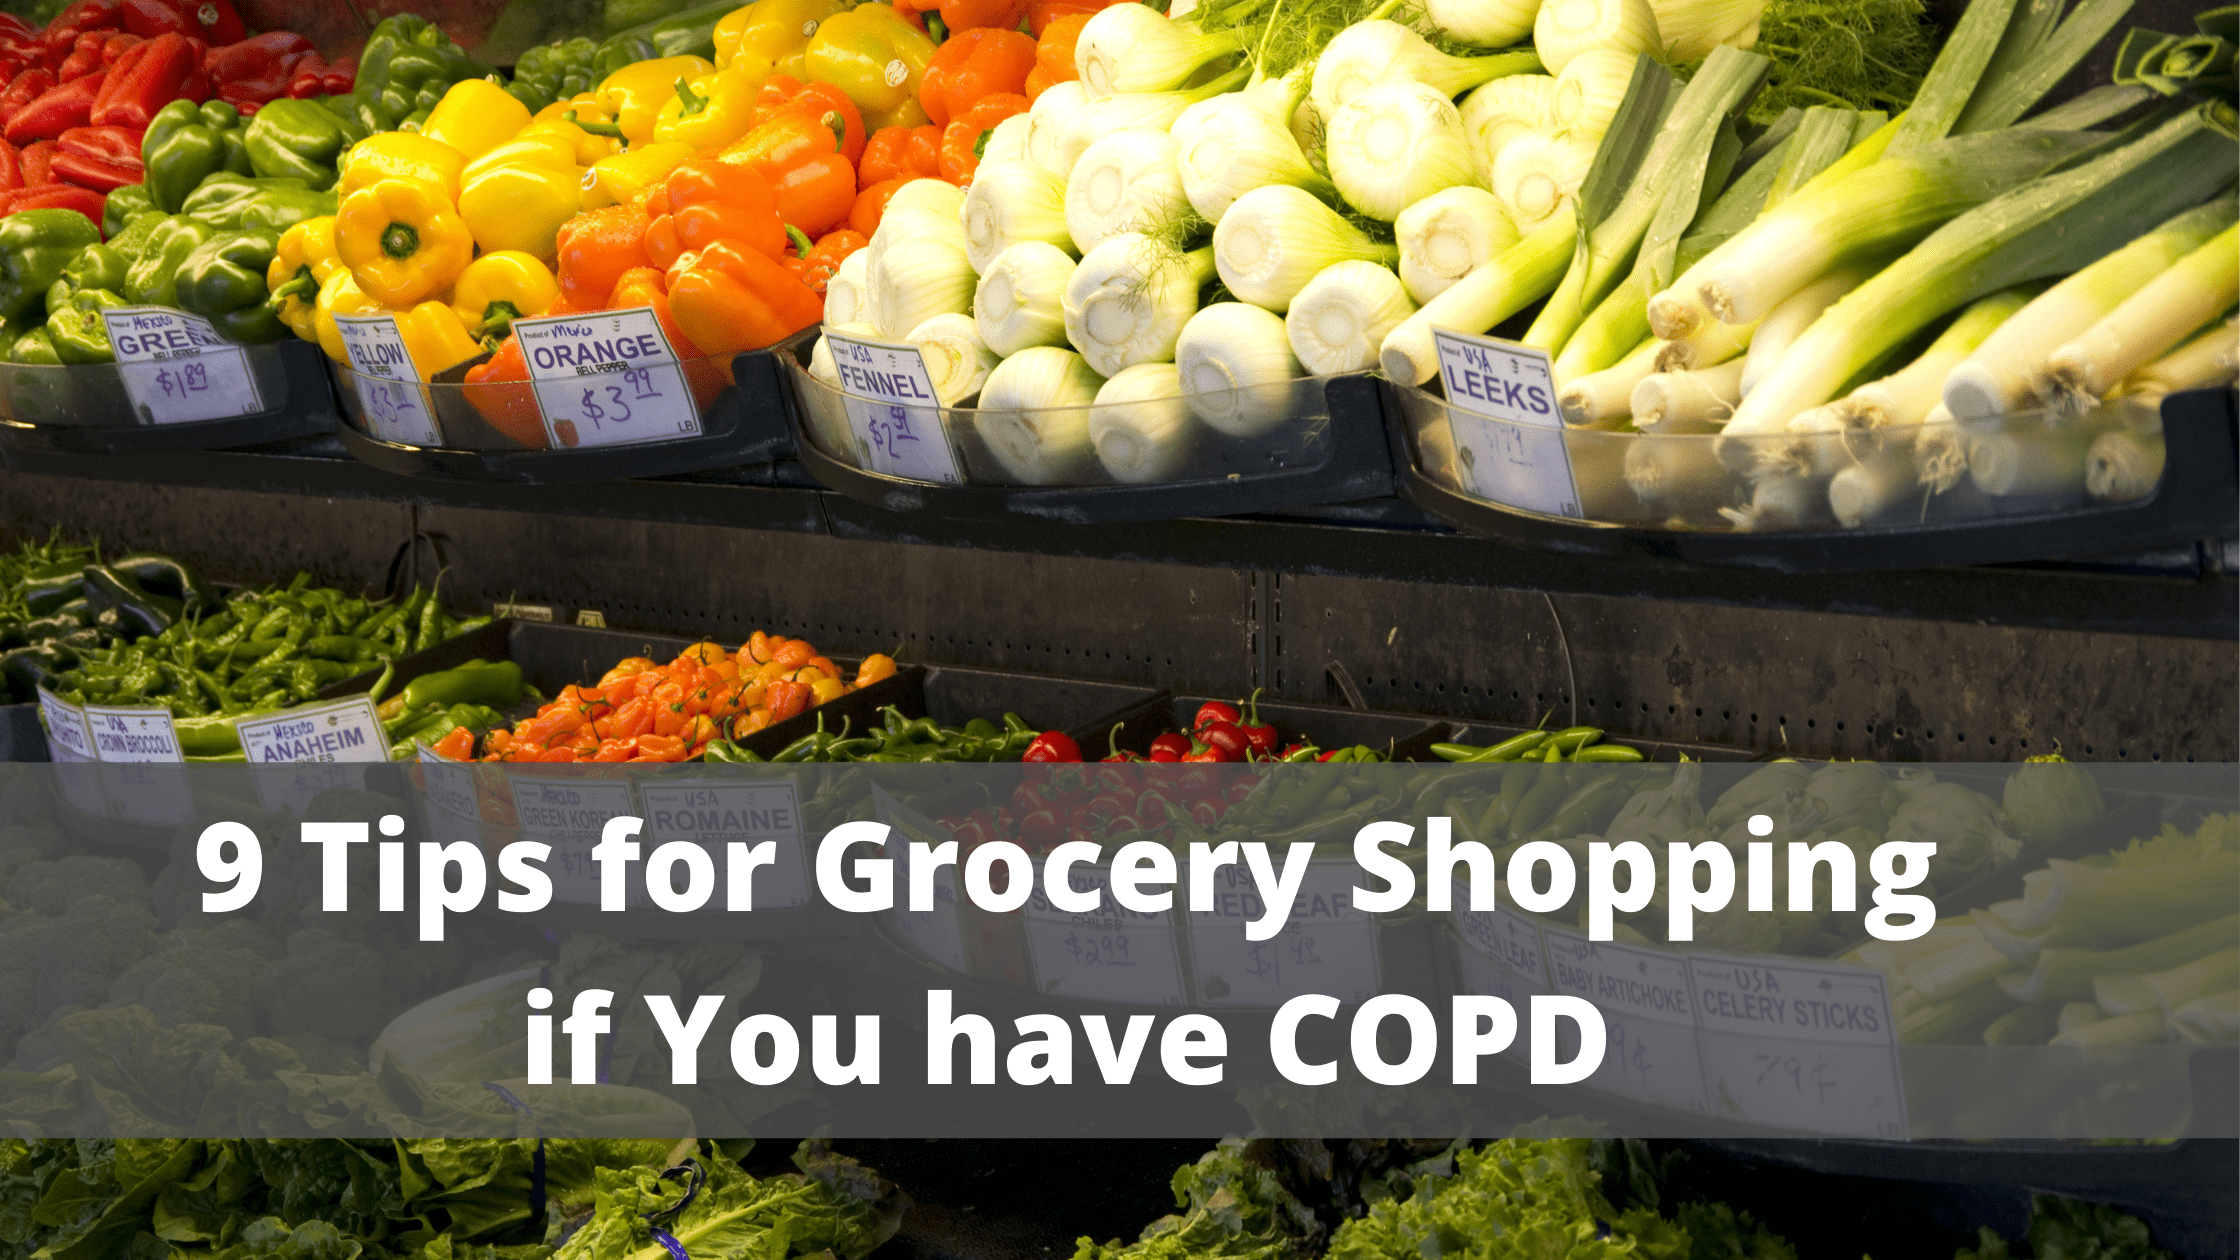 9 Tips for Grocery Shopping if You have COPD